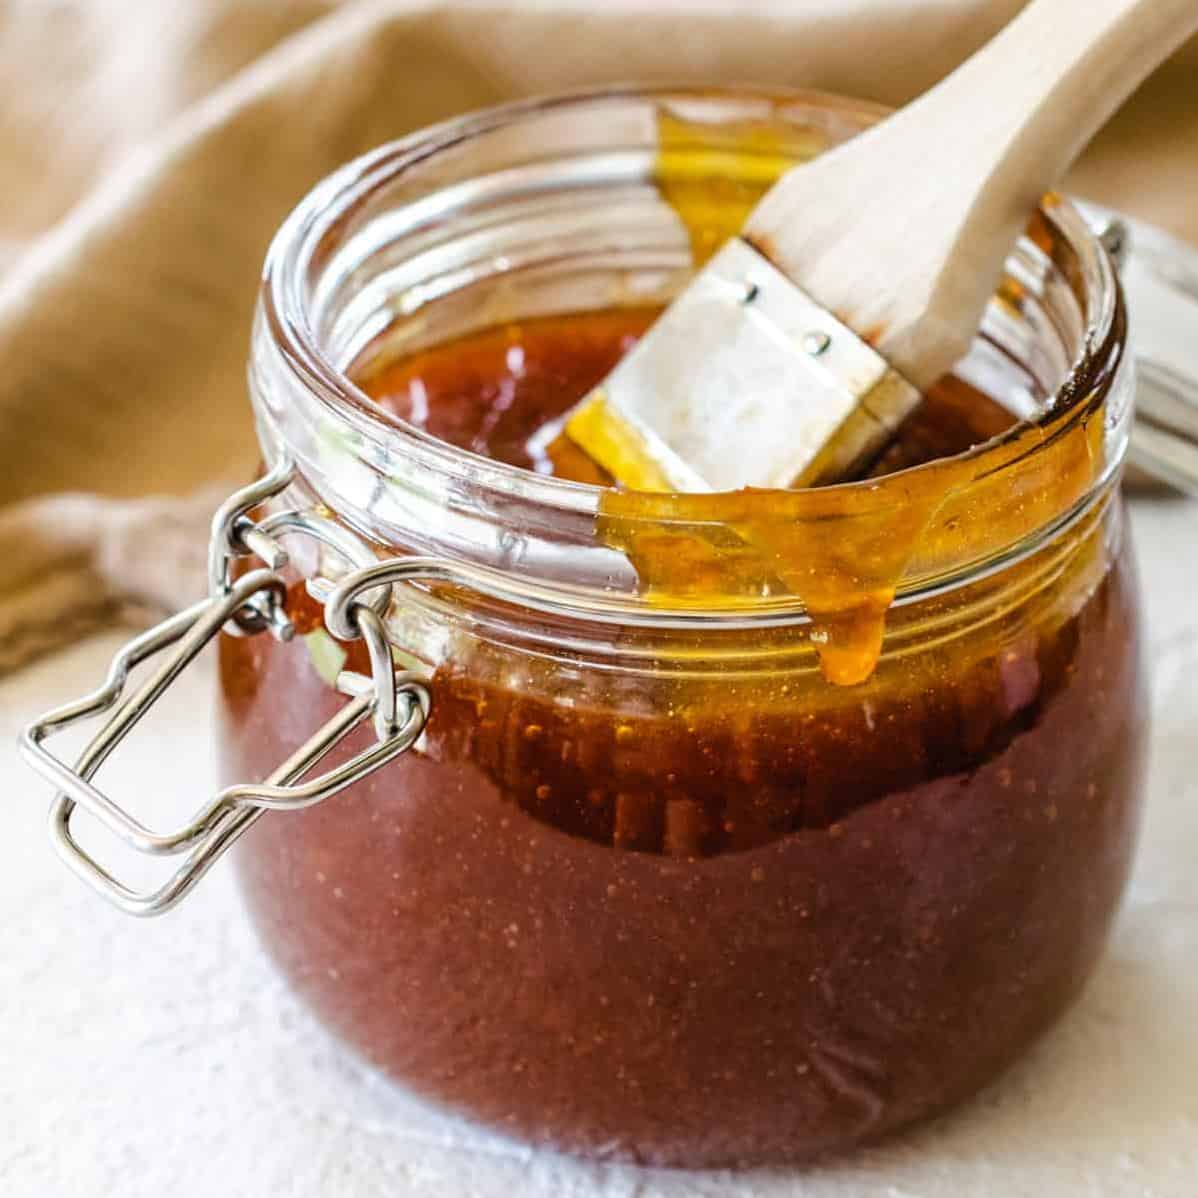  Impress your guests with the unique flavor and color of this apricot BBQ sauce